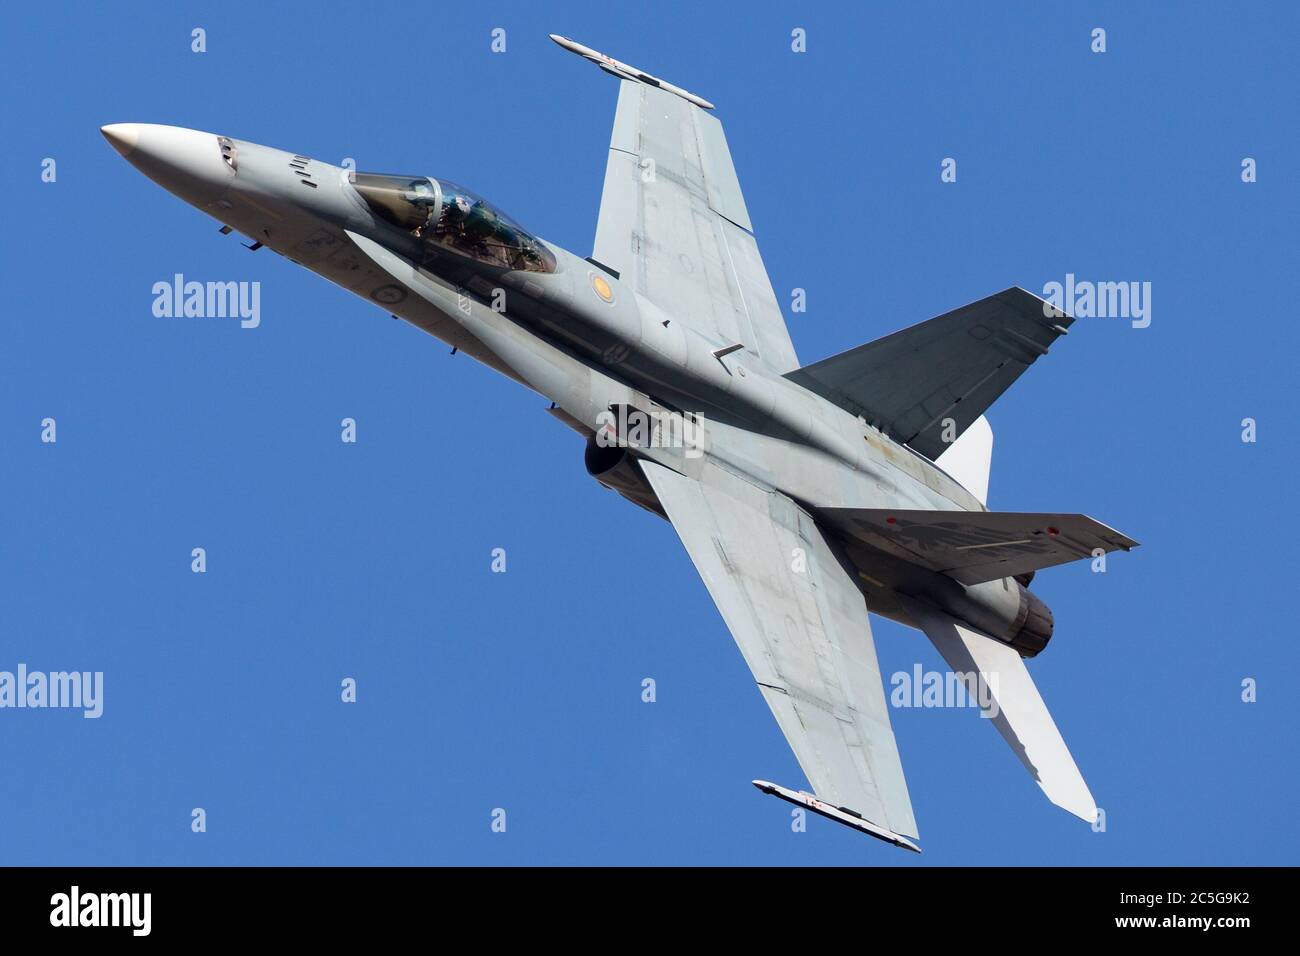 Royal Australian Air Force (RAAF) McDonnell Douglas F/A-18A Hornet multirole fighter aircraft A21-3 from 3 Squadron RAAF Williamtown. Stock Photo